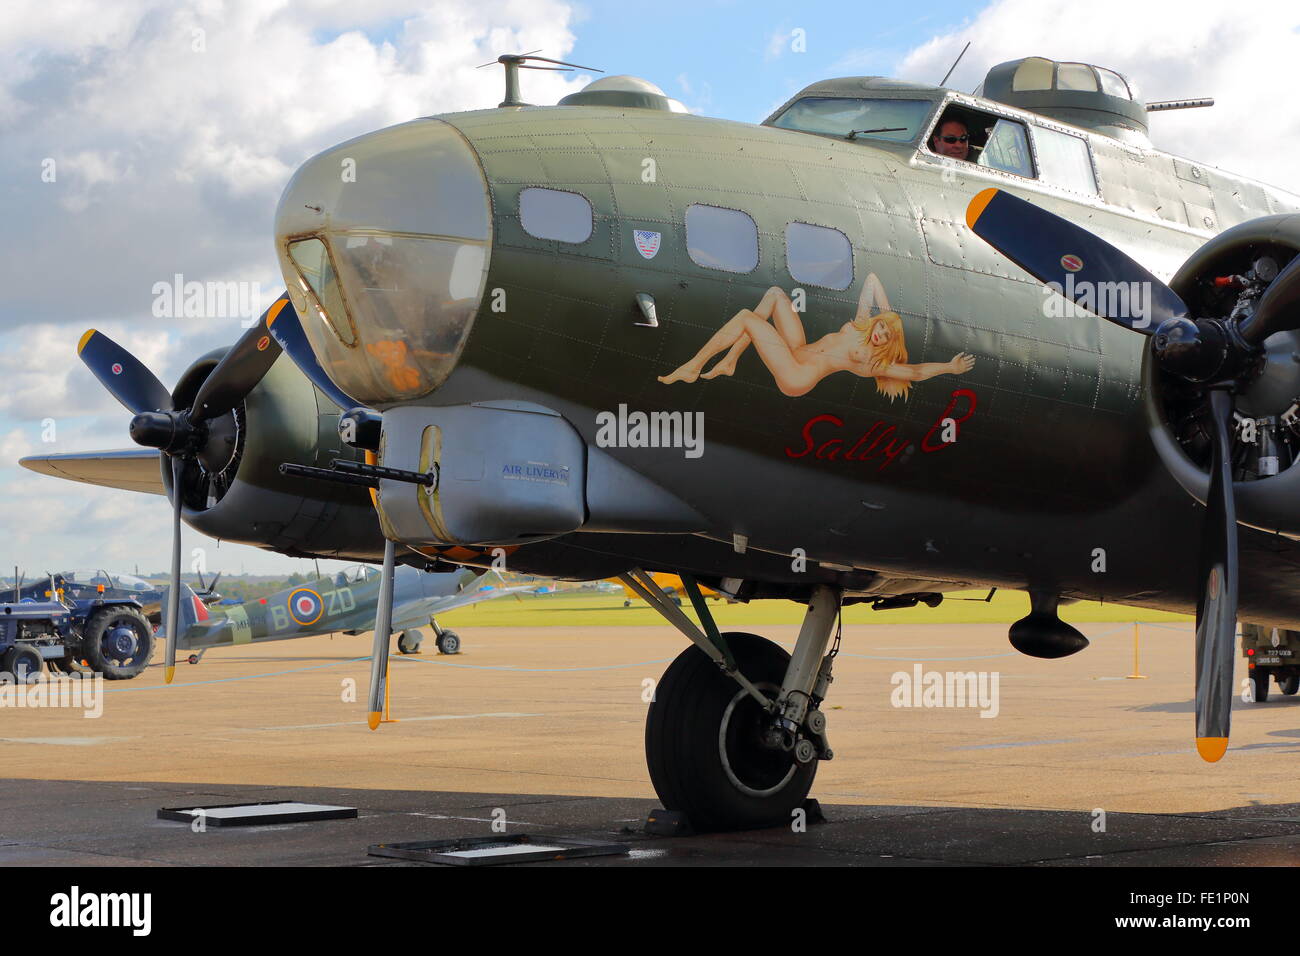 Boeing B17 Flying Fortress Memphis Belle at Duxford Air Show, UK Stock Photo